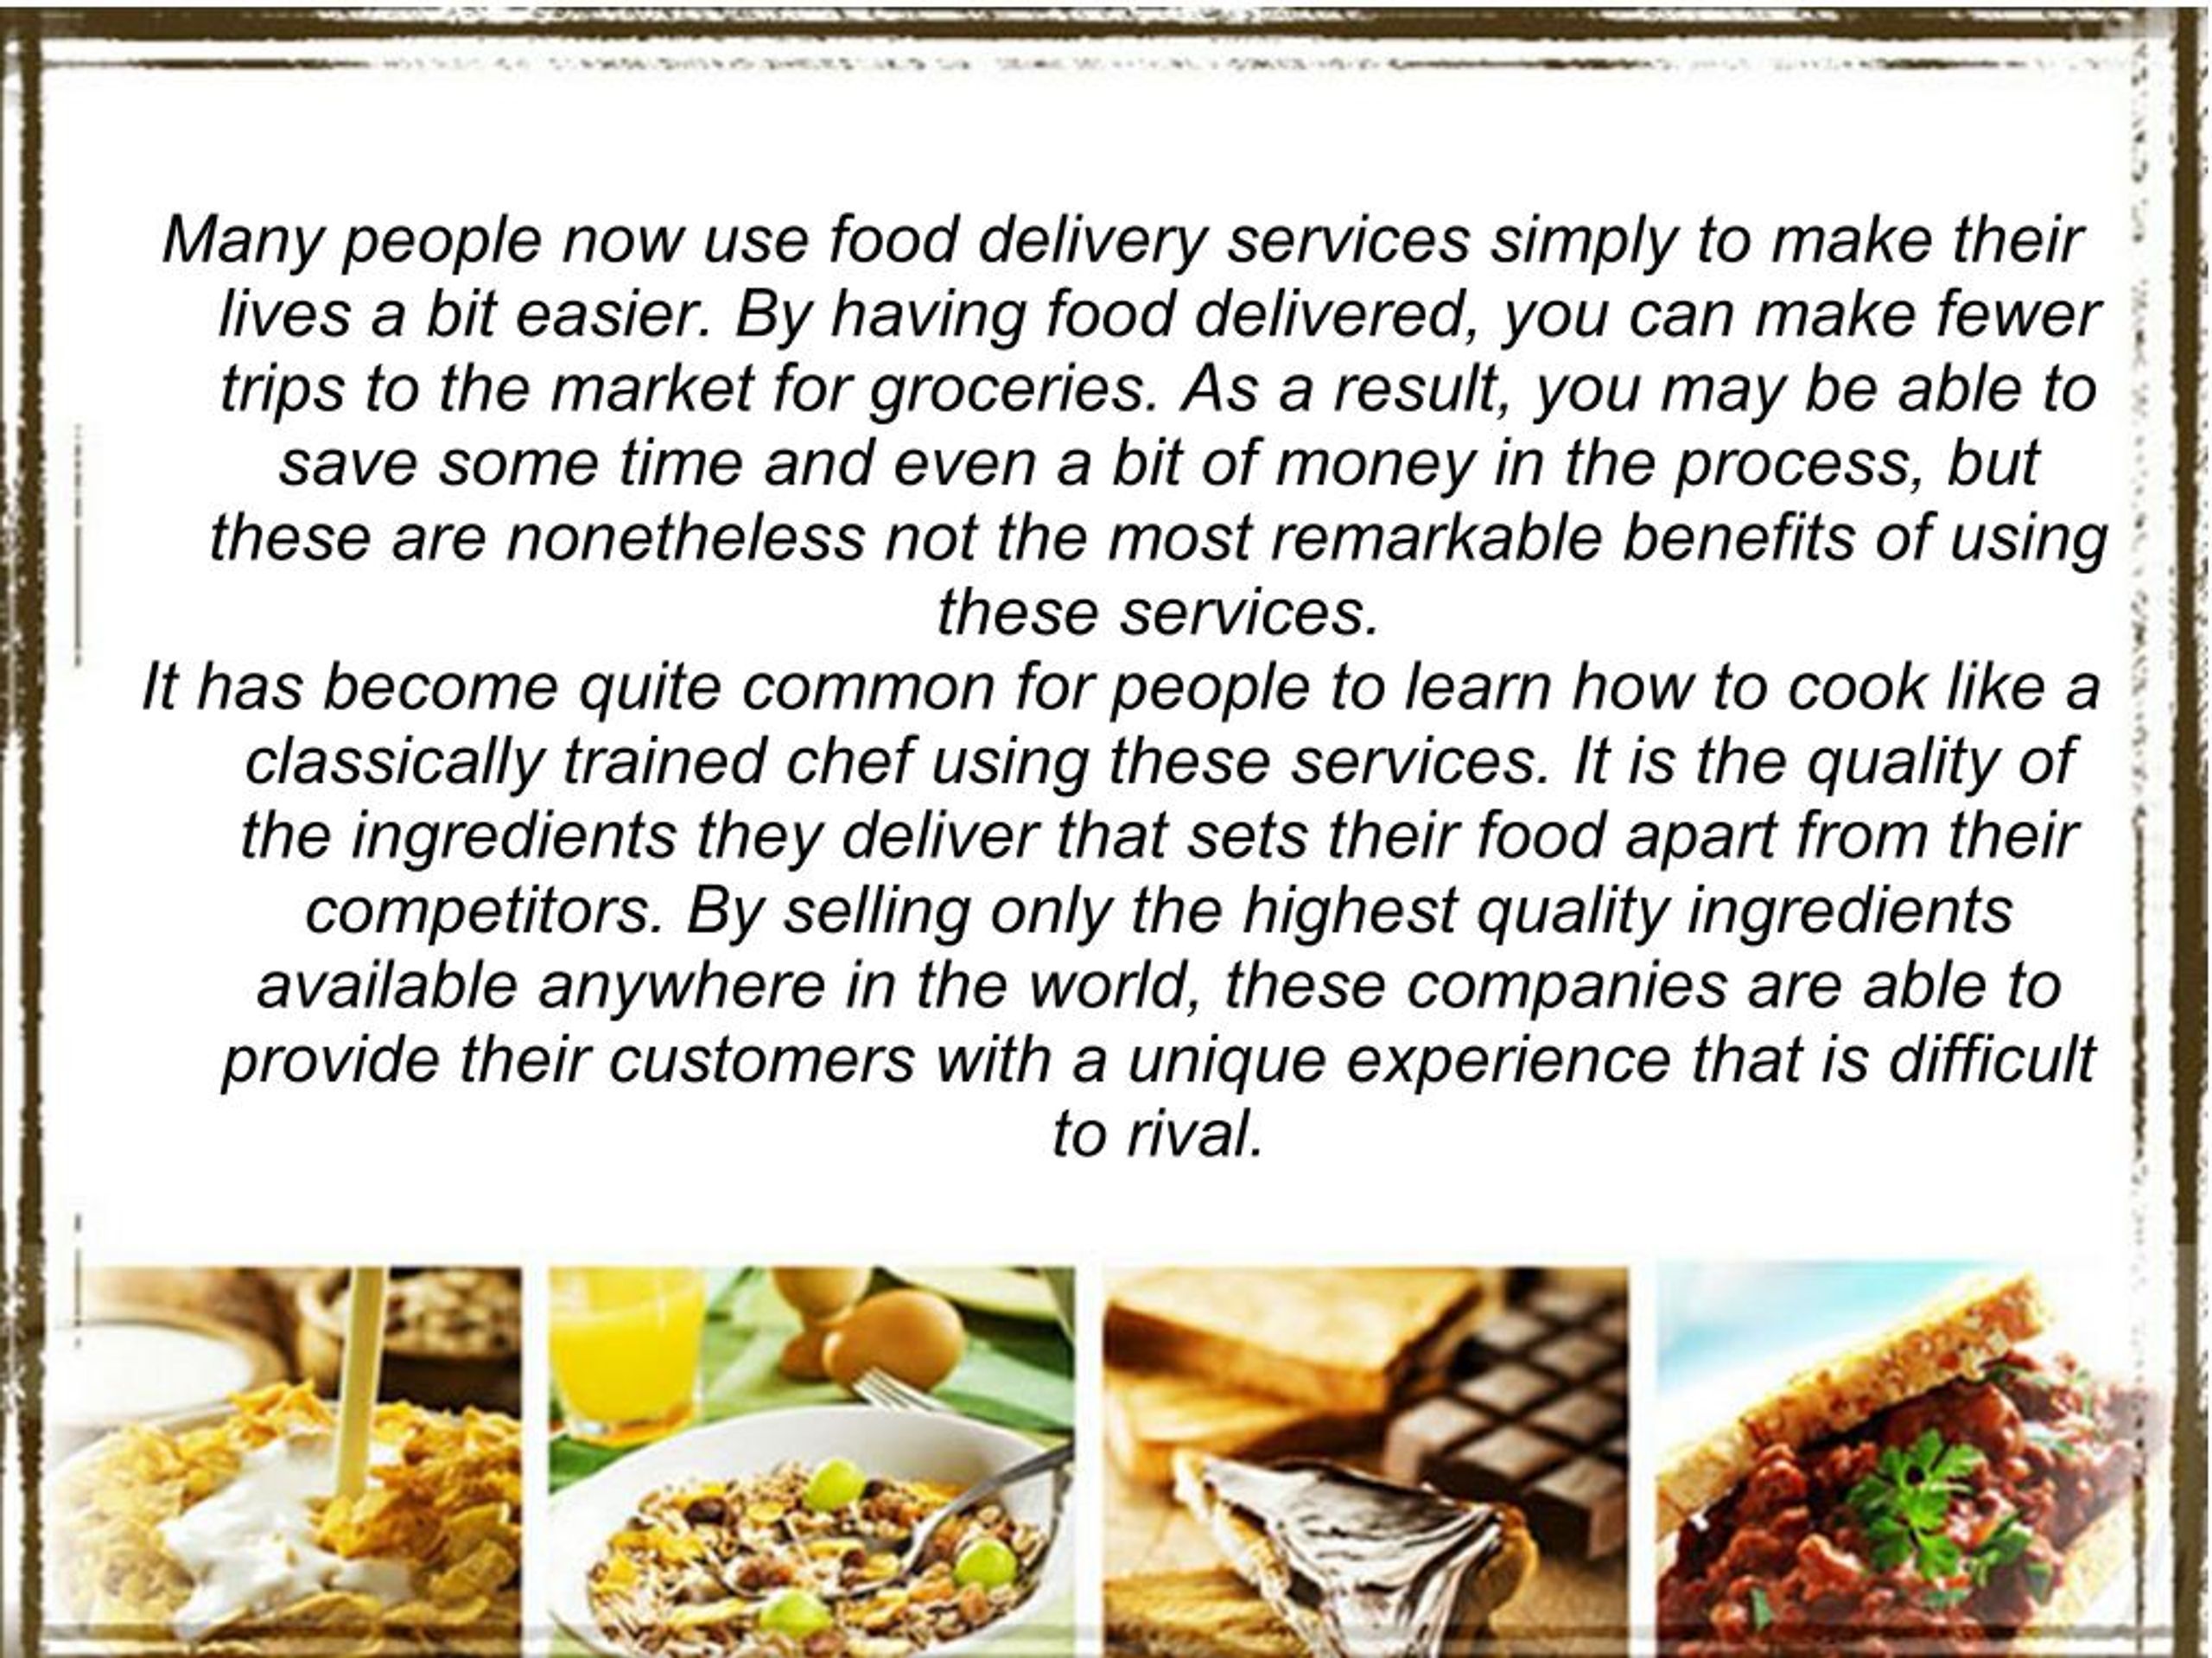 food delivery essay